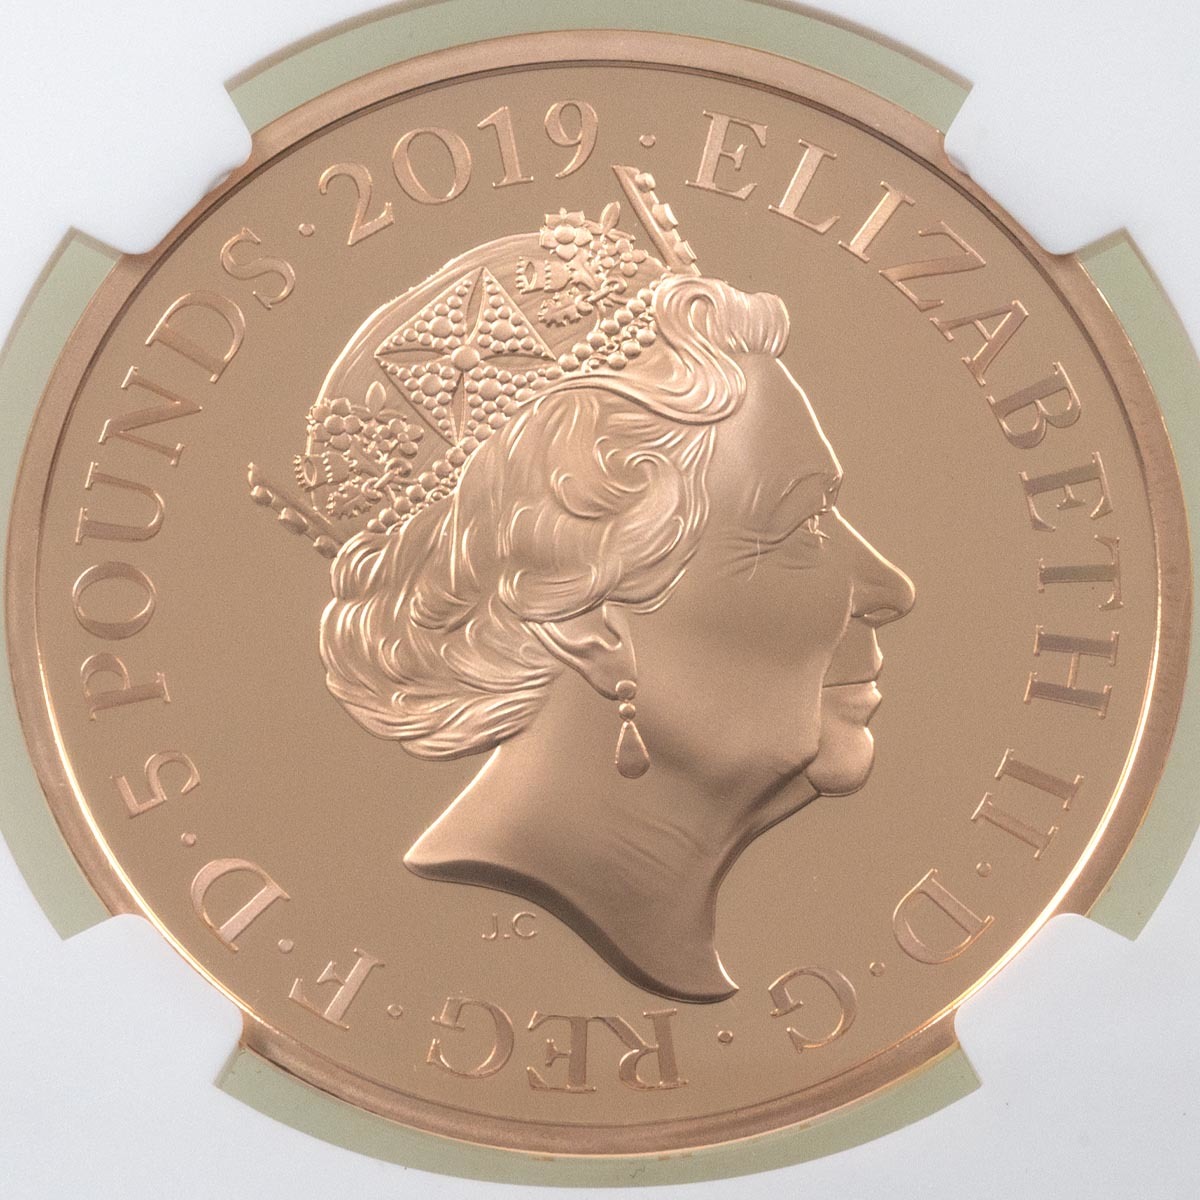 UK19VCGP 2019 Queen Victoria 200th Anniversary Five Pound Crown Gold Proof Coin NGC Graded PF 70 Ultra Cameo Obverse